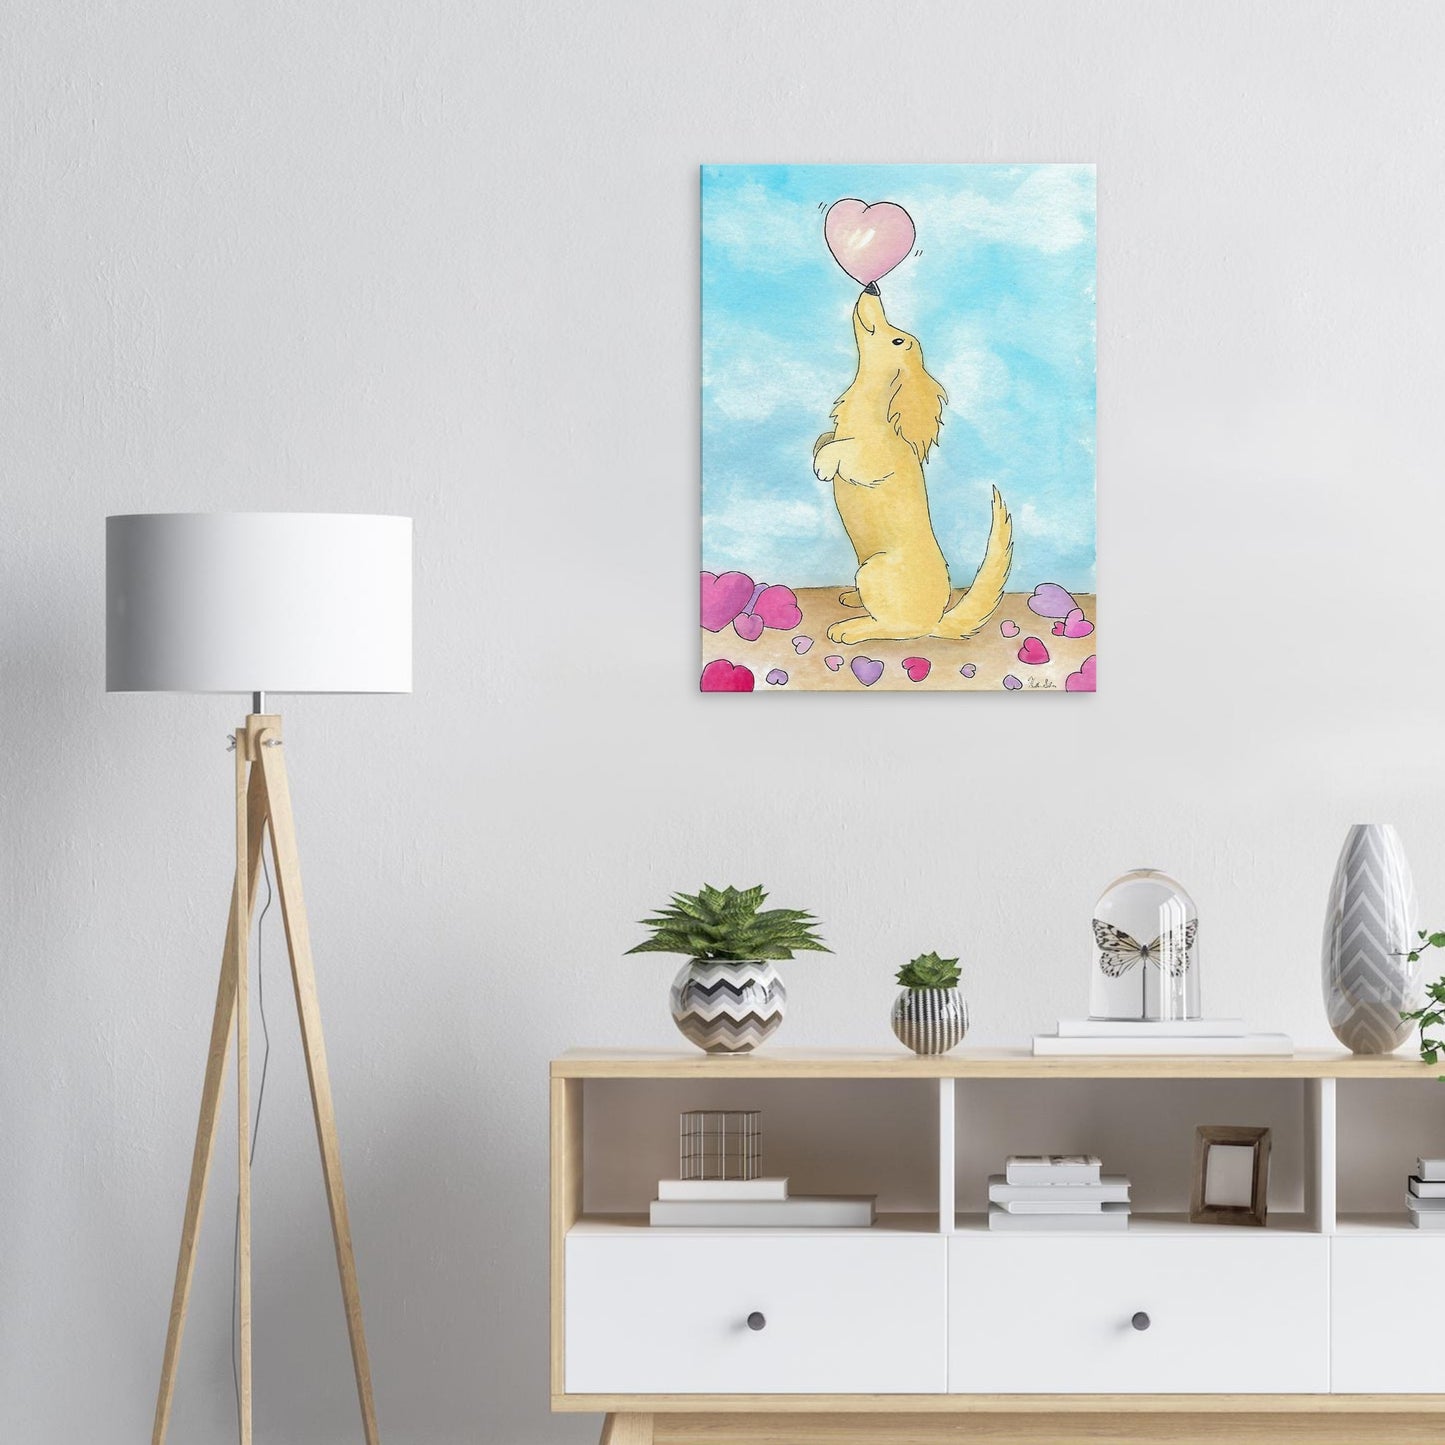 24 by 32 inch canvas wall art print of Heather Silver's watercolor painting, Puppy Love. It features a cute dog balancing a pink heart on its nose against a blue sky background. Canvas shown on wall above dresser with potted plants by a lamp.